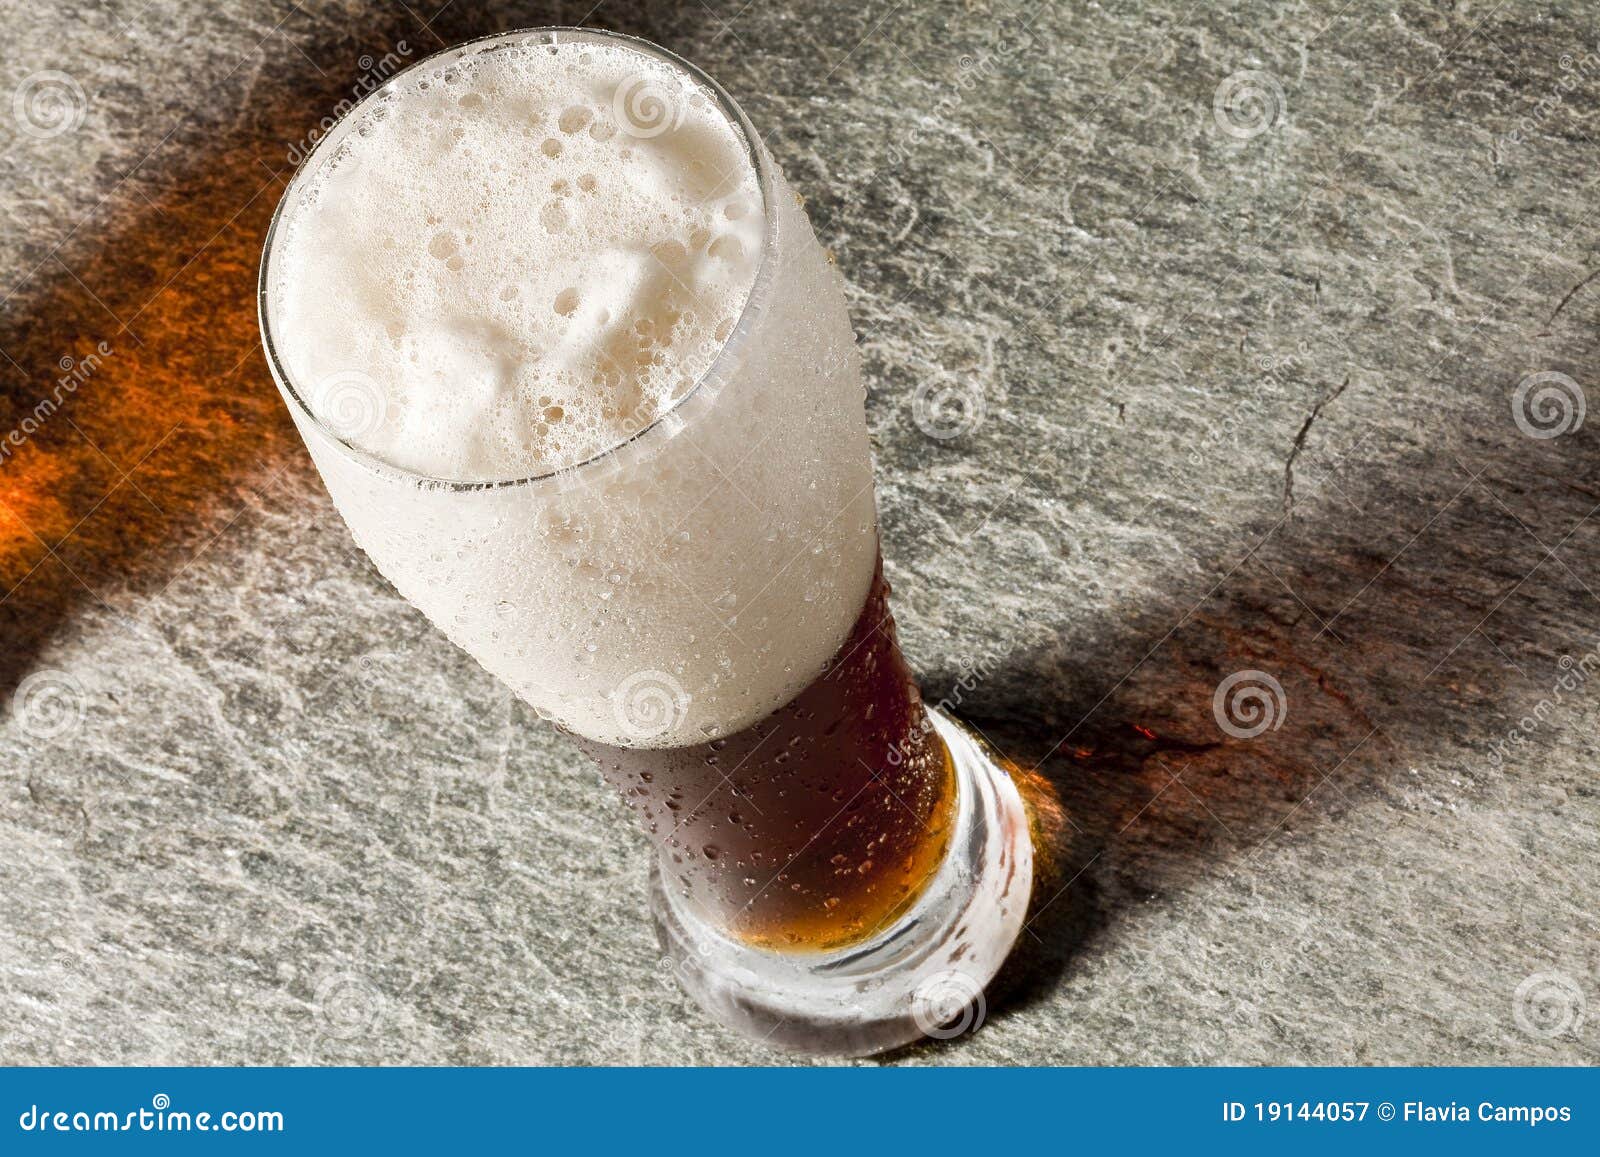 dark cold beer with frothy